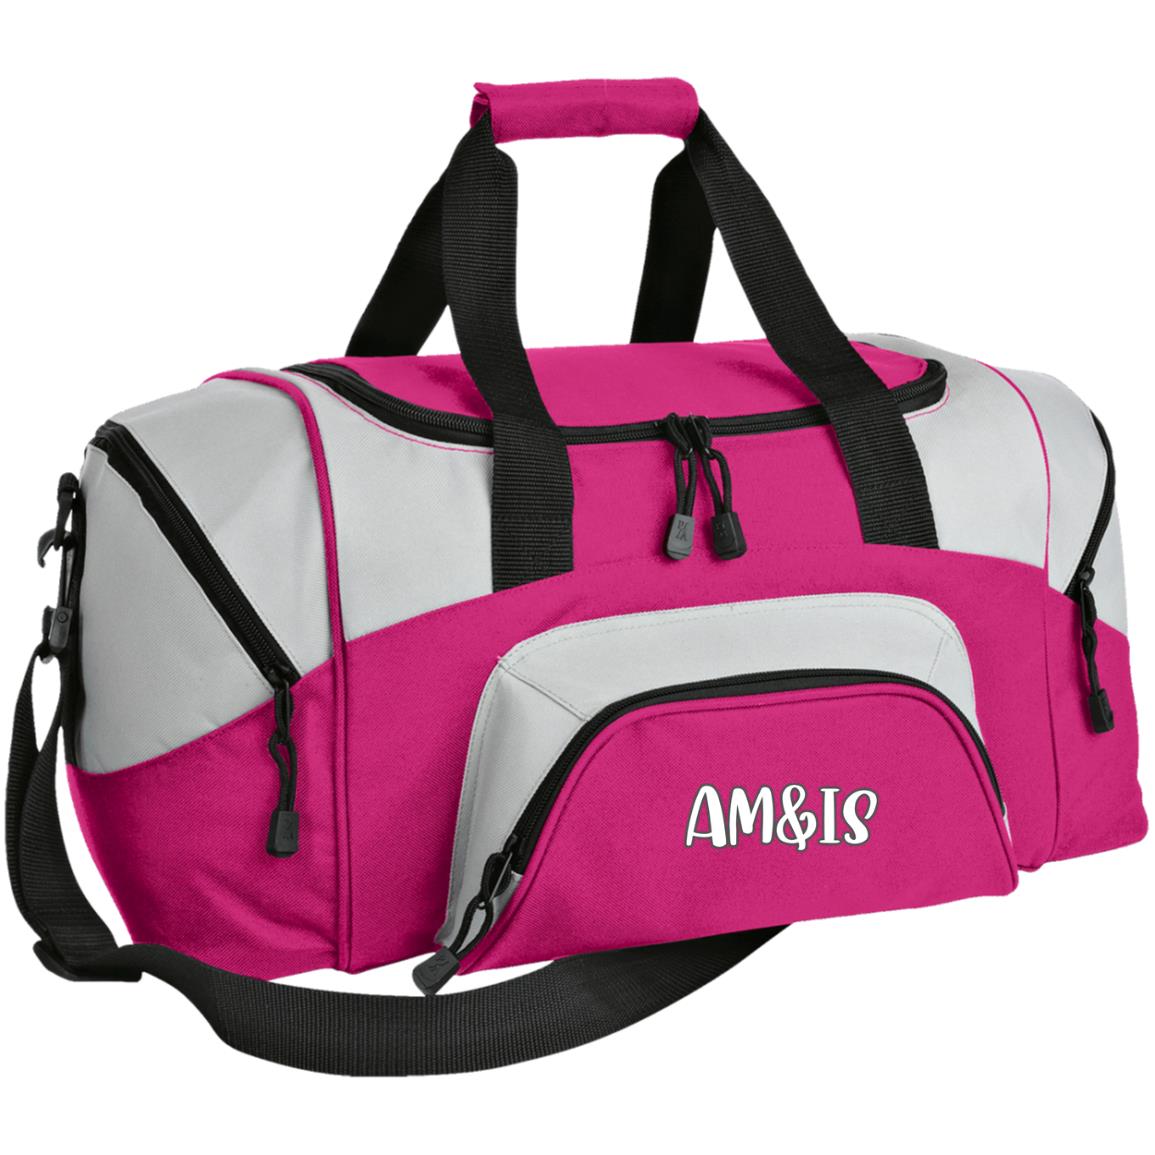 TROPICAL PINK ONE SIZE - AM&IS Activewear Colorblock Sport Duffel - duffel bag at TFC&H Co.